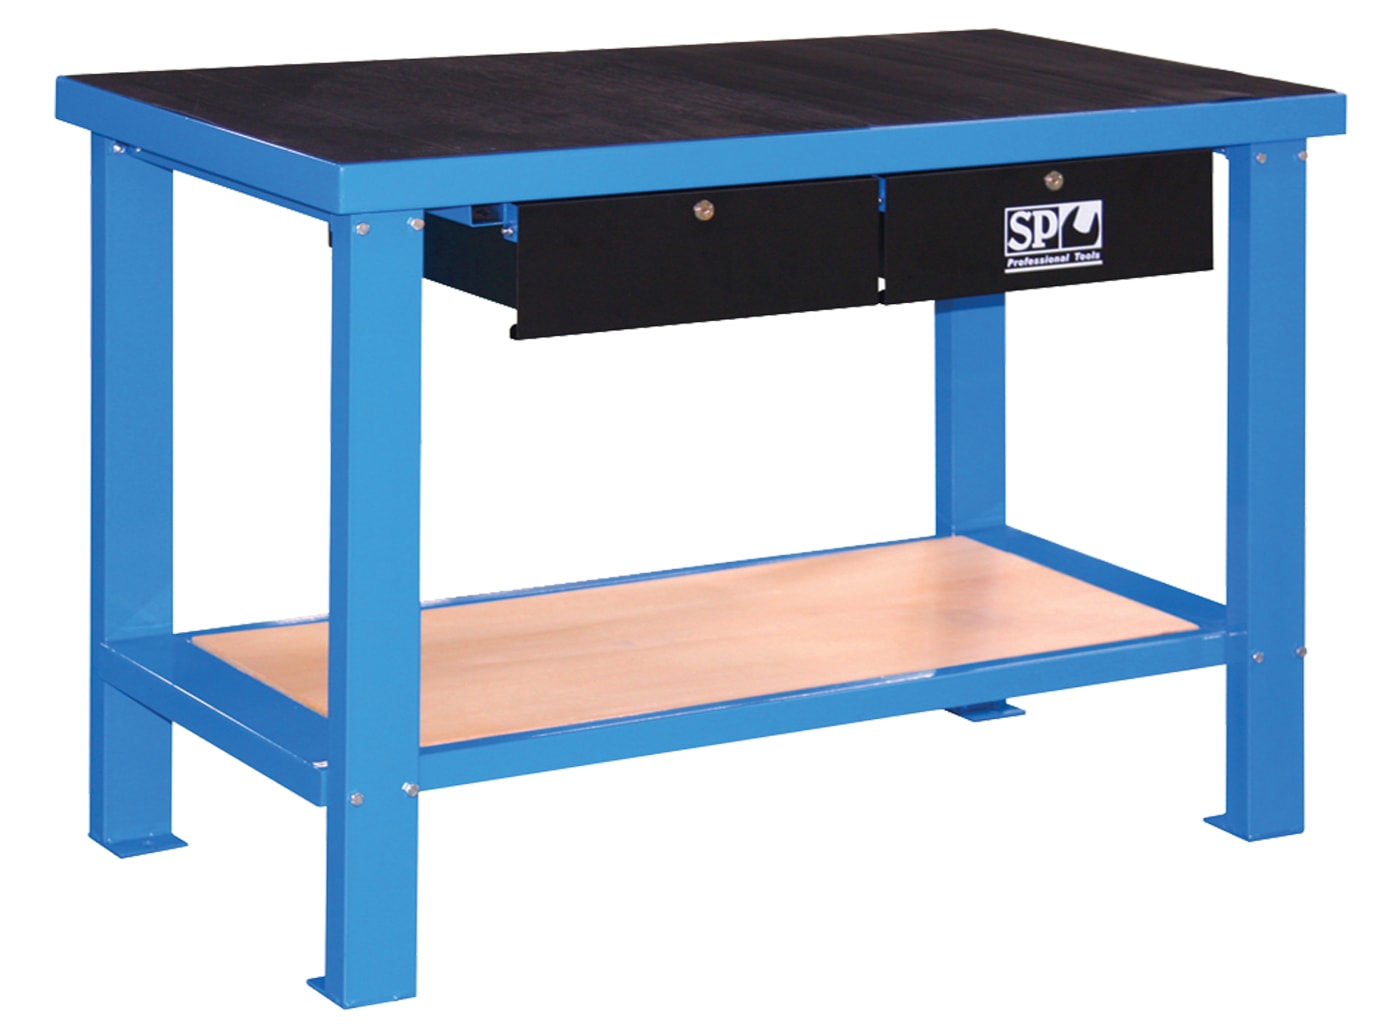 Heavy Duty Workshop Bench - SP40410 by SP Tools